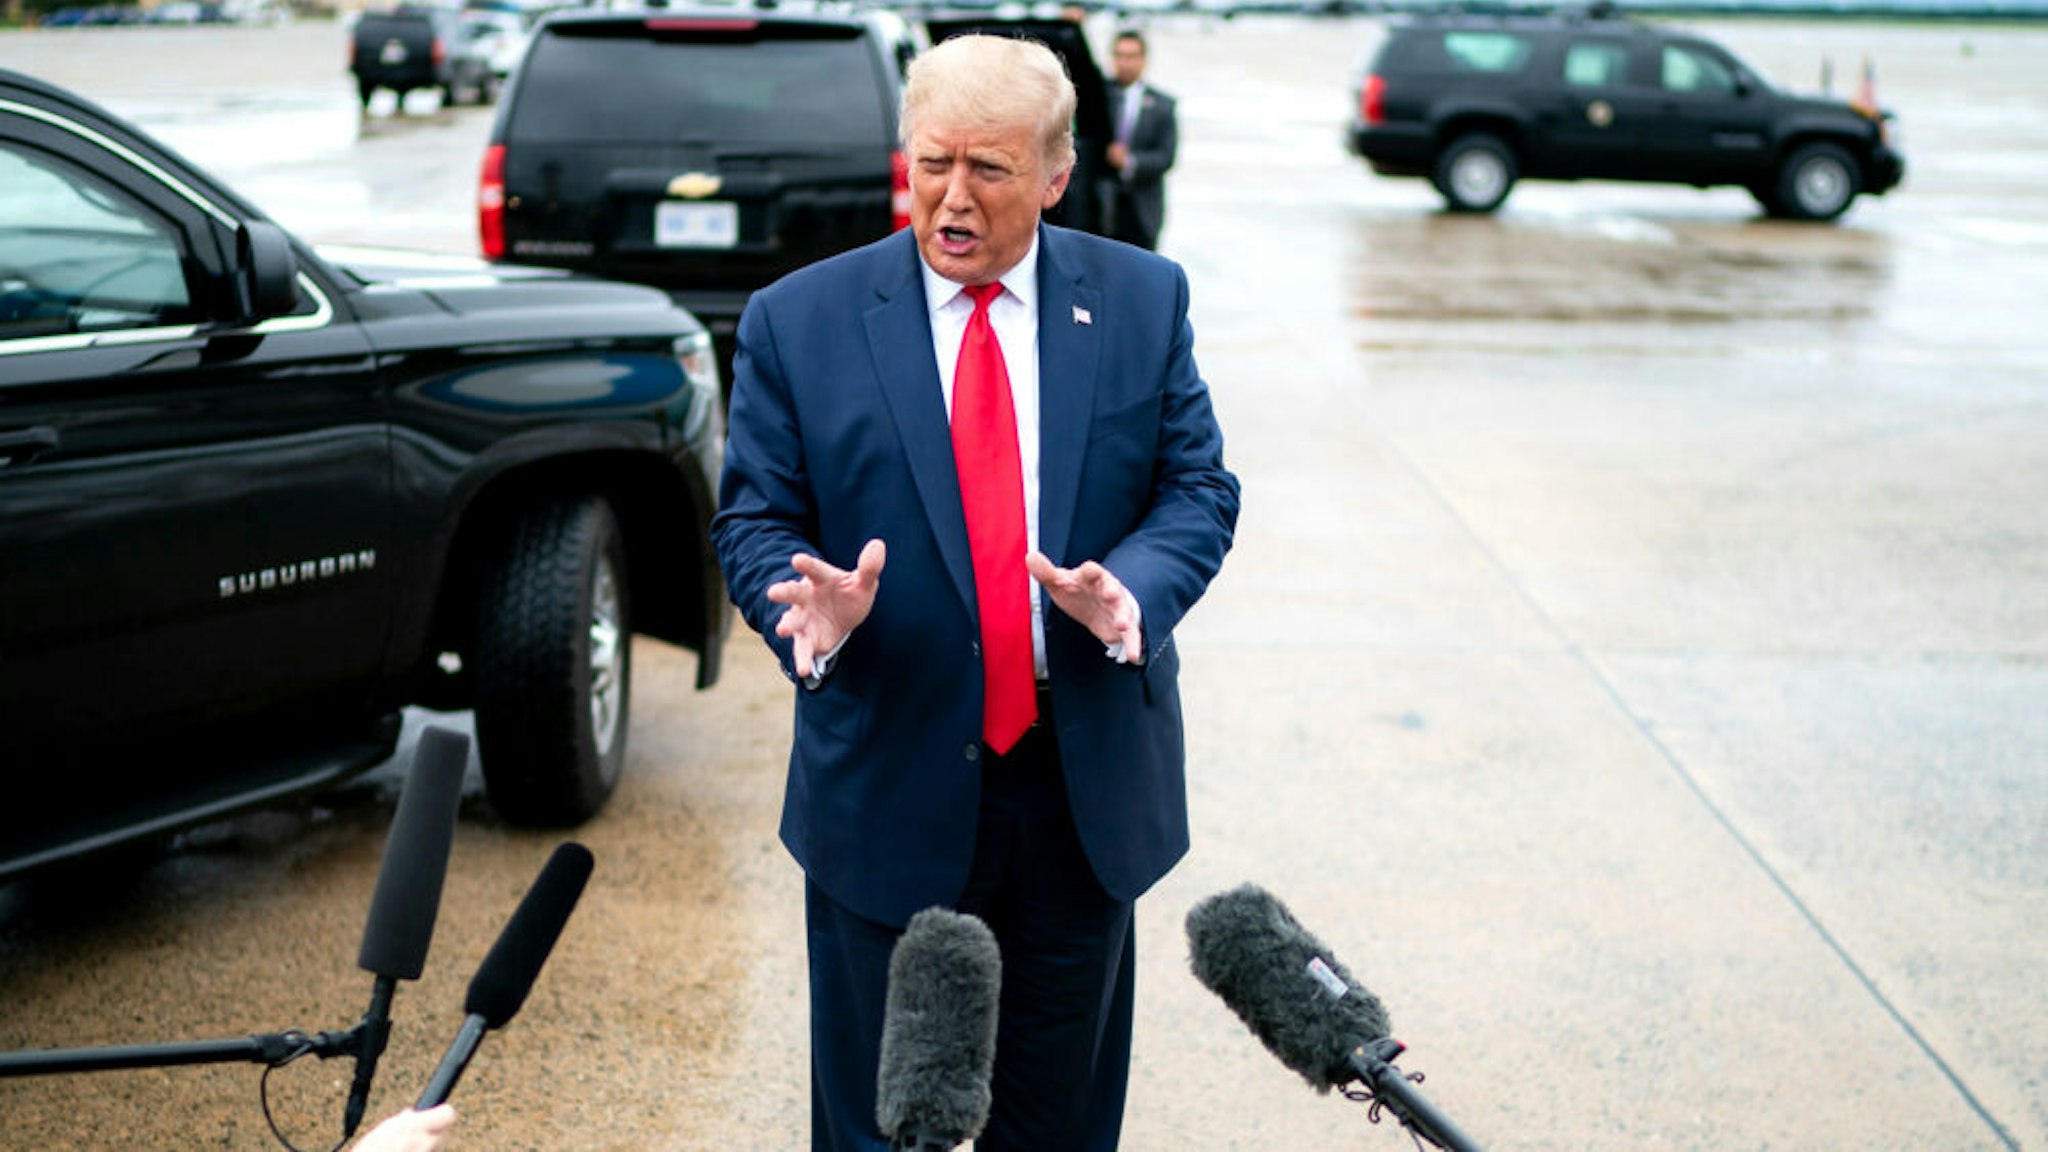 President Donald J. Trump speaks with reporters Thursday, Sept. 10, 2020, at Joint Base Andrews, Md., prior to boarding Air Force One for his trip to Michigan.